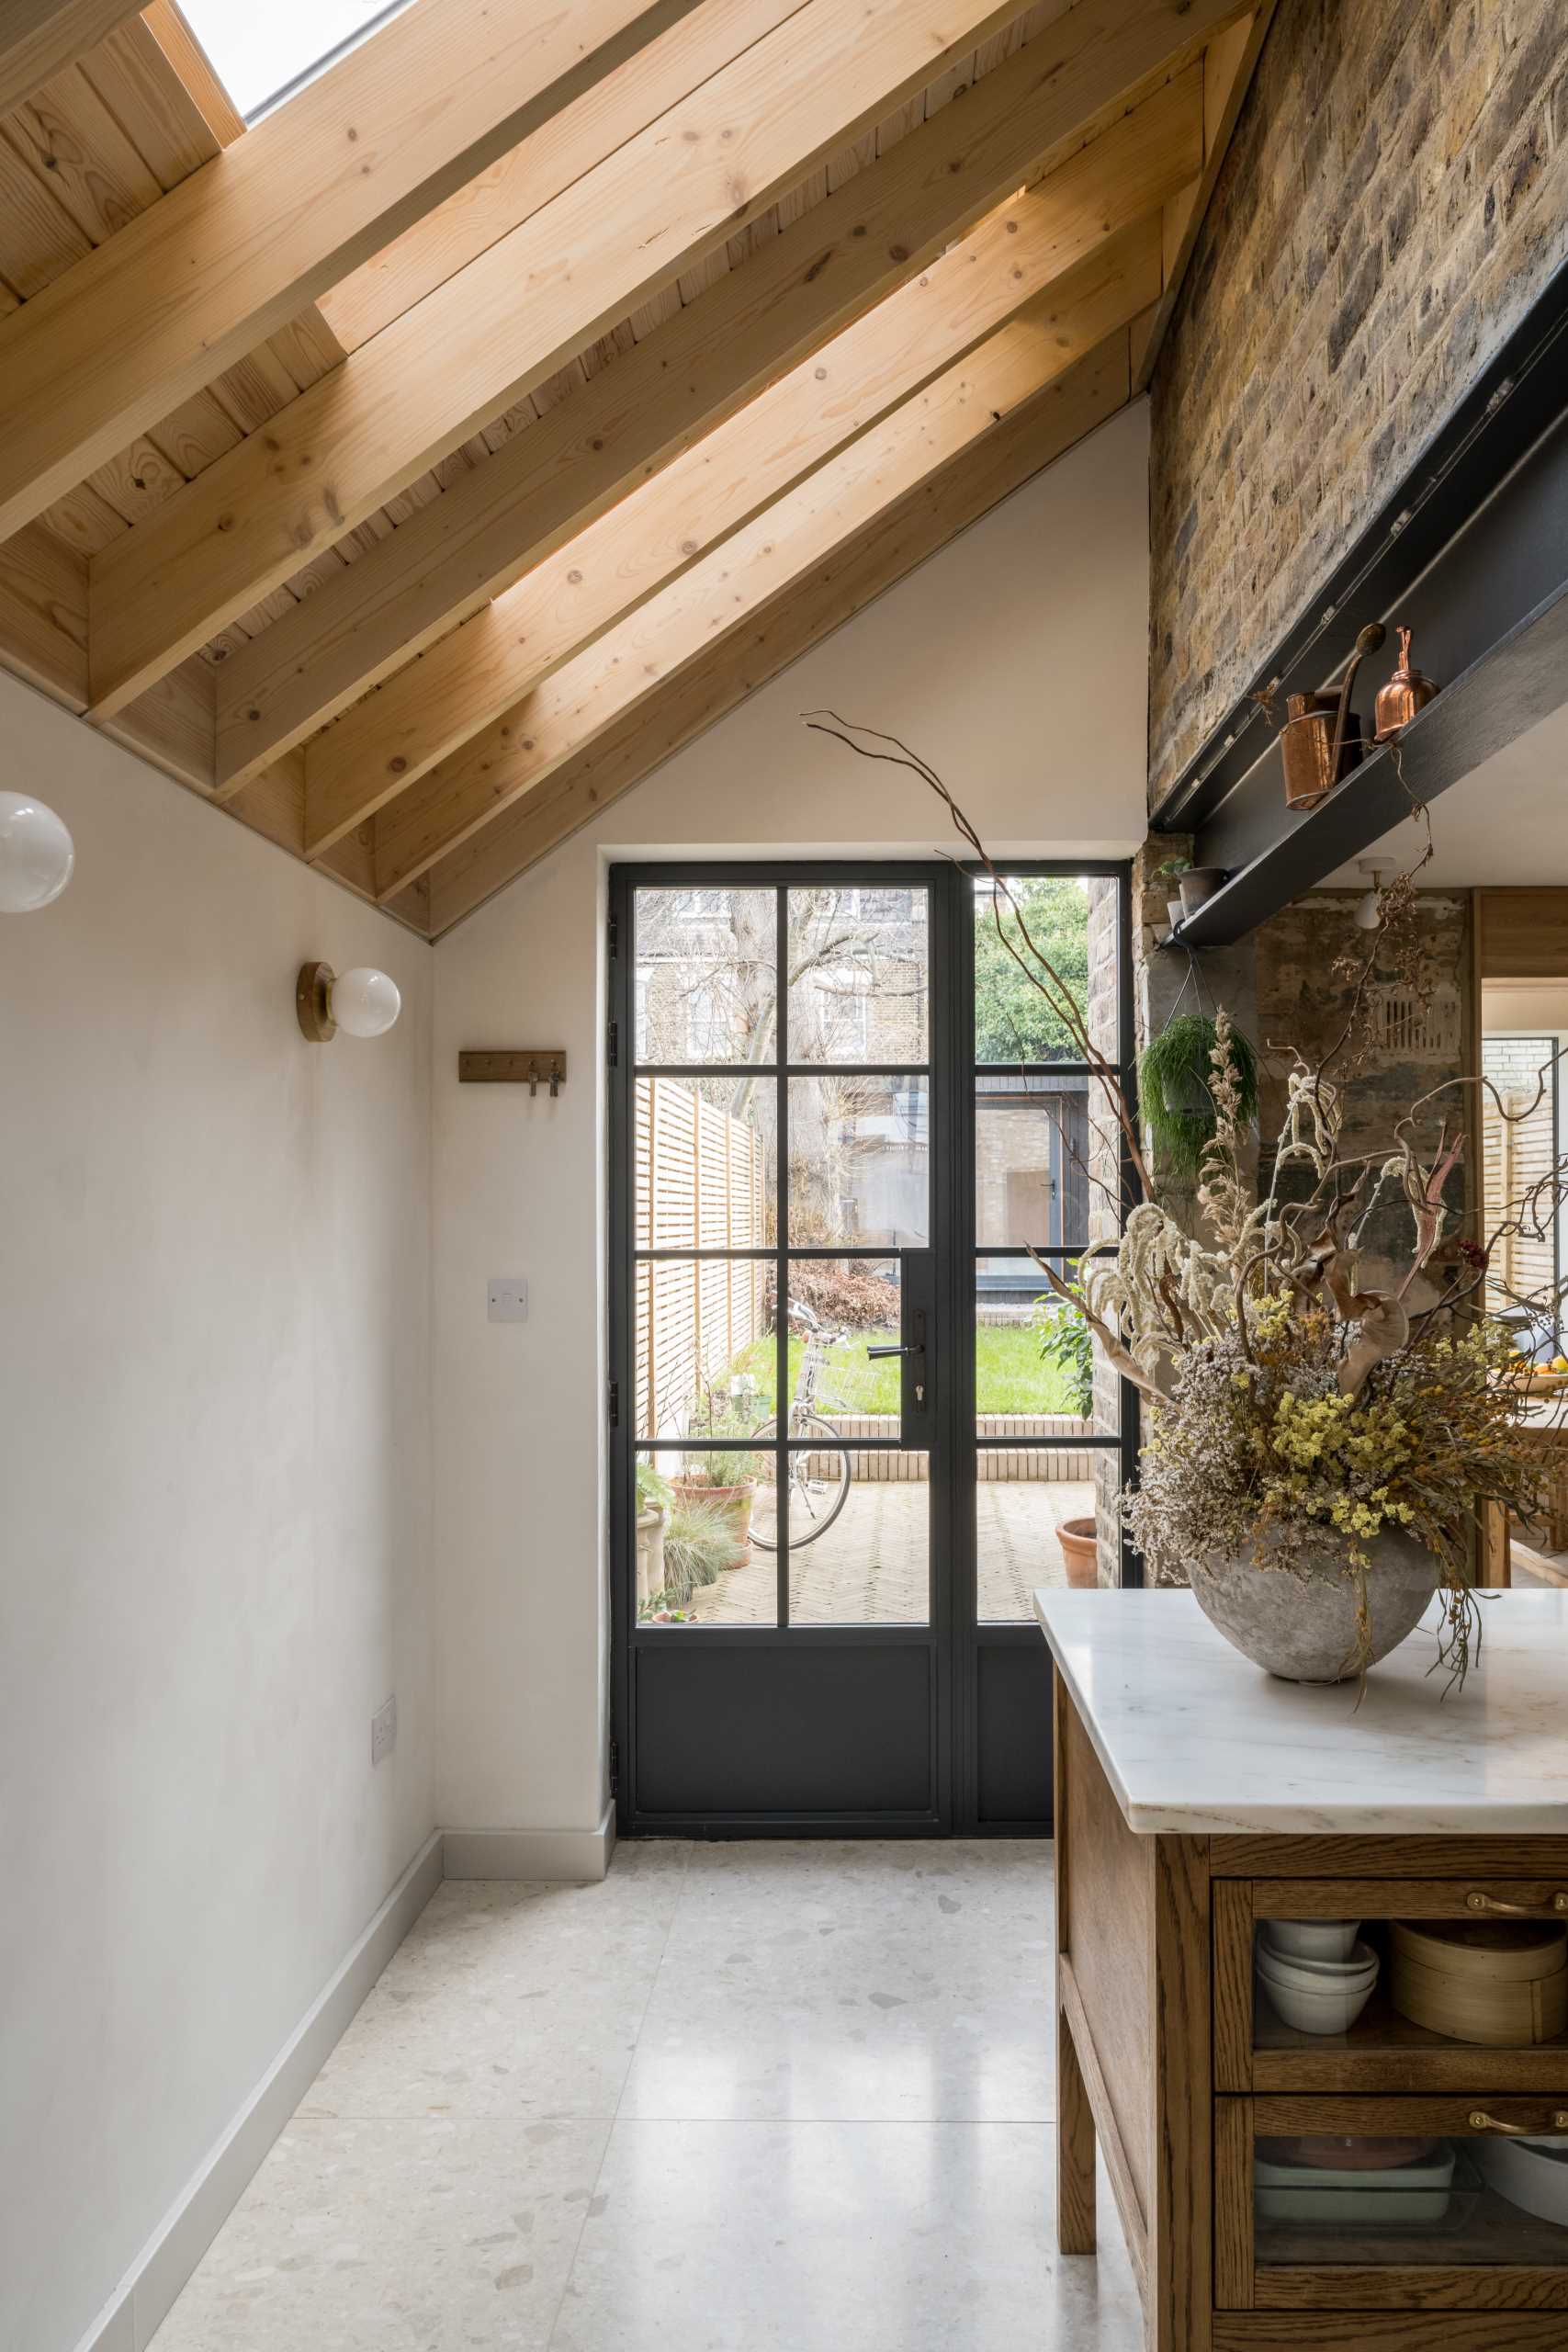 A new extension connects to the rear garden through a black-framed gl، door.